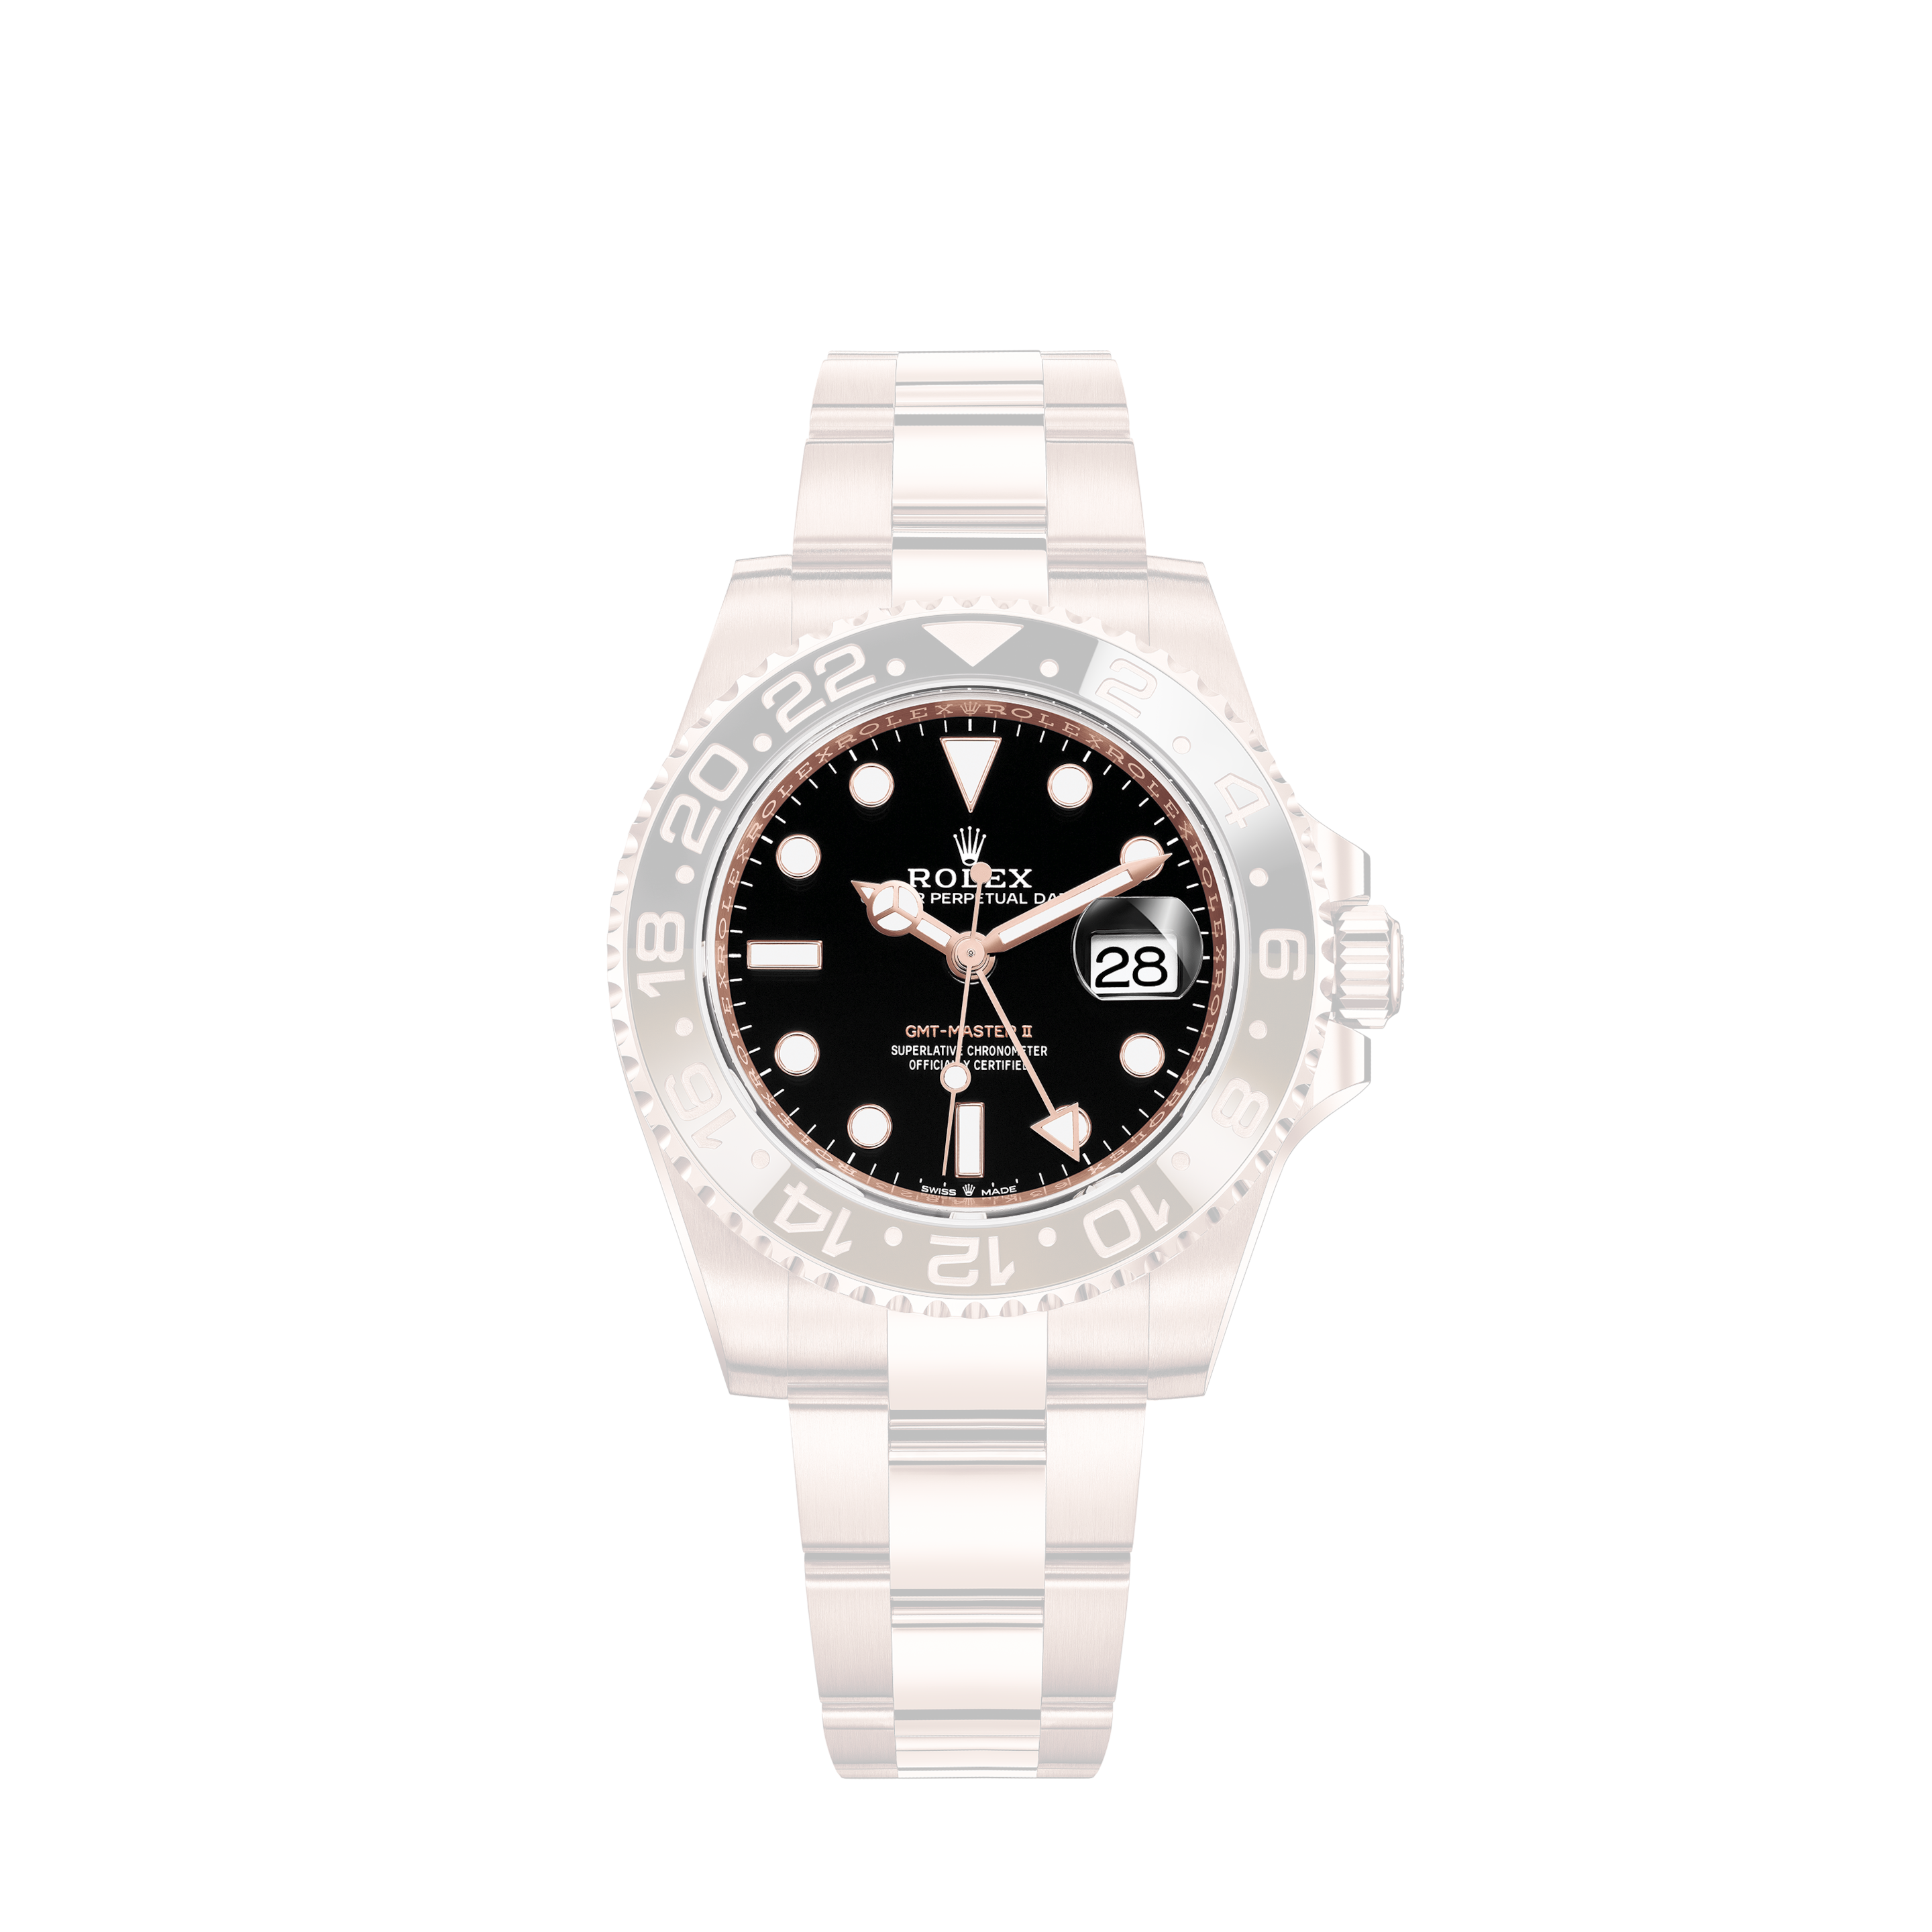 Rolex Datejust 31mm - Steel and Gold Pink Gold - Fluted Bezel - Jubilee 178271 MDRJRolex Datejust 31mm - Steel and Gold Pink Gold - Fluted Bezel - Jubilee 178271 MRJ